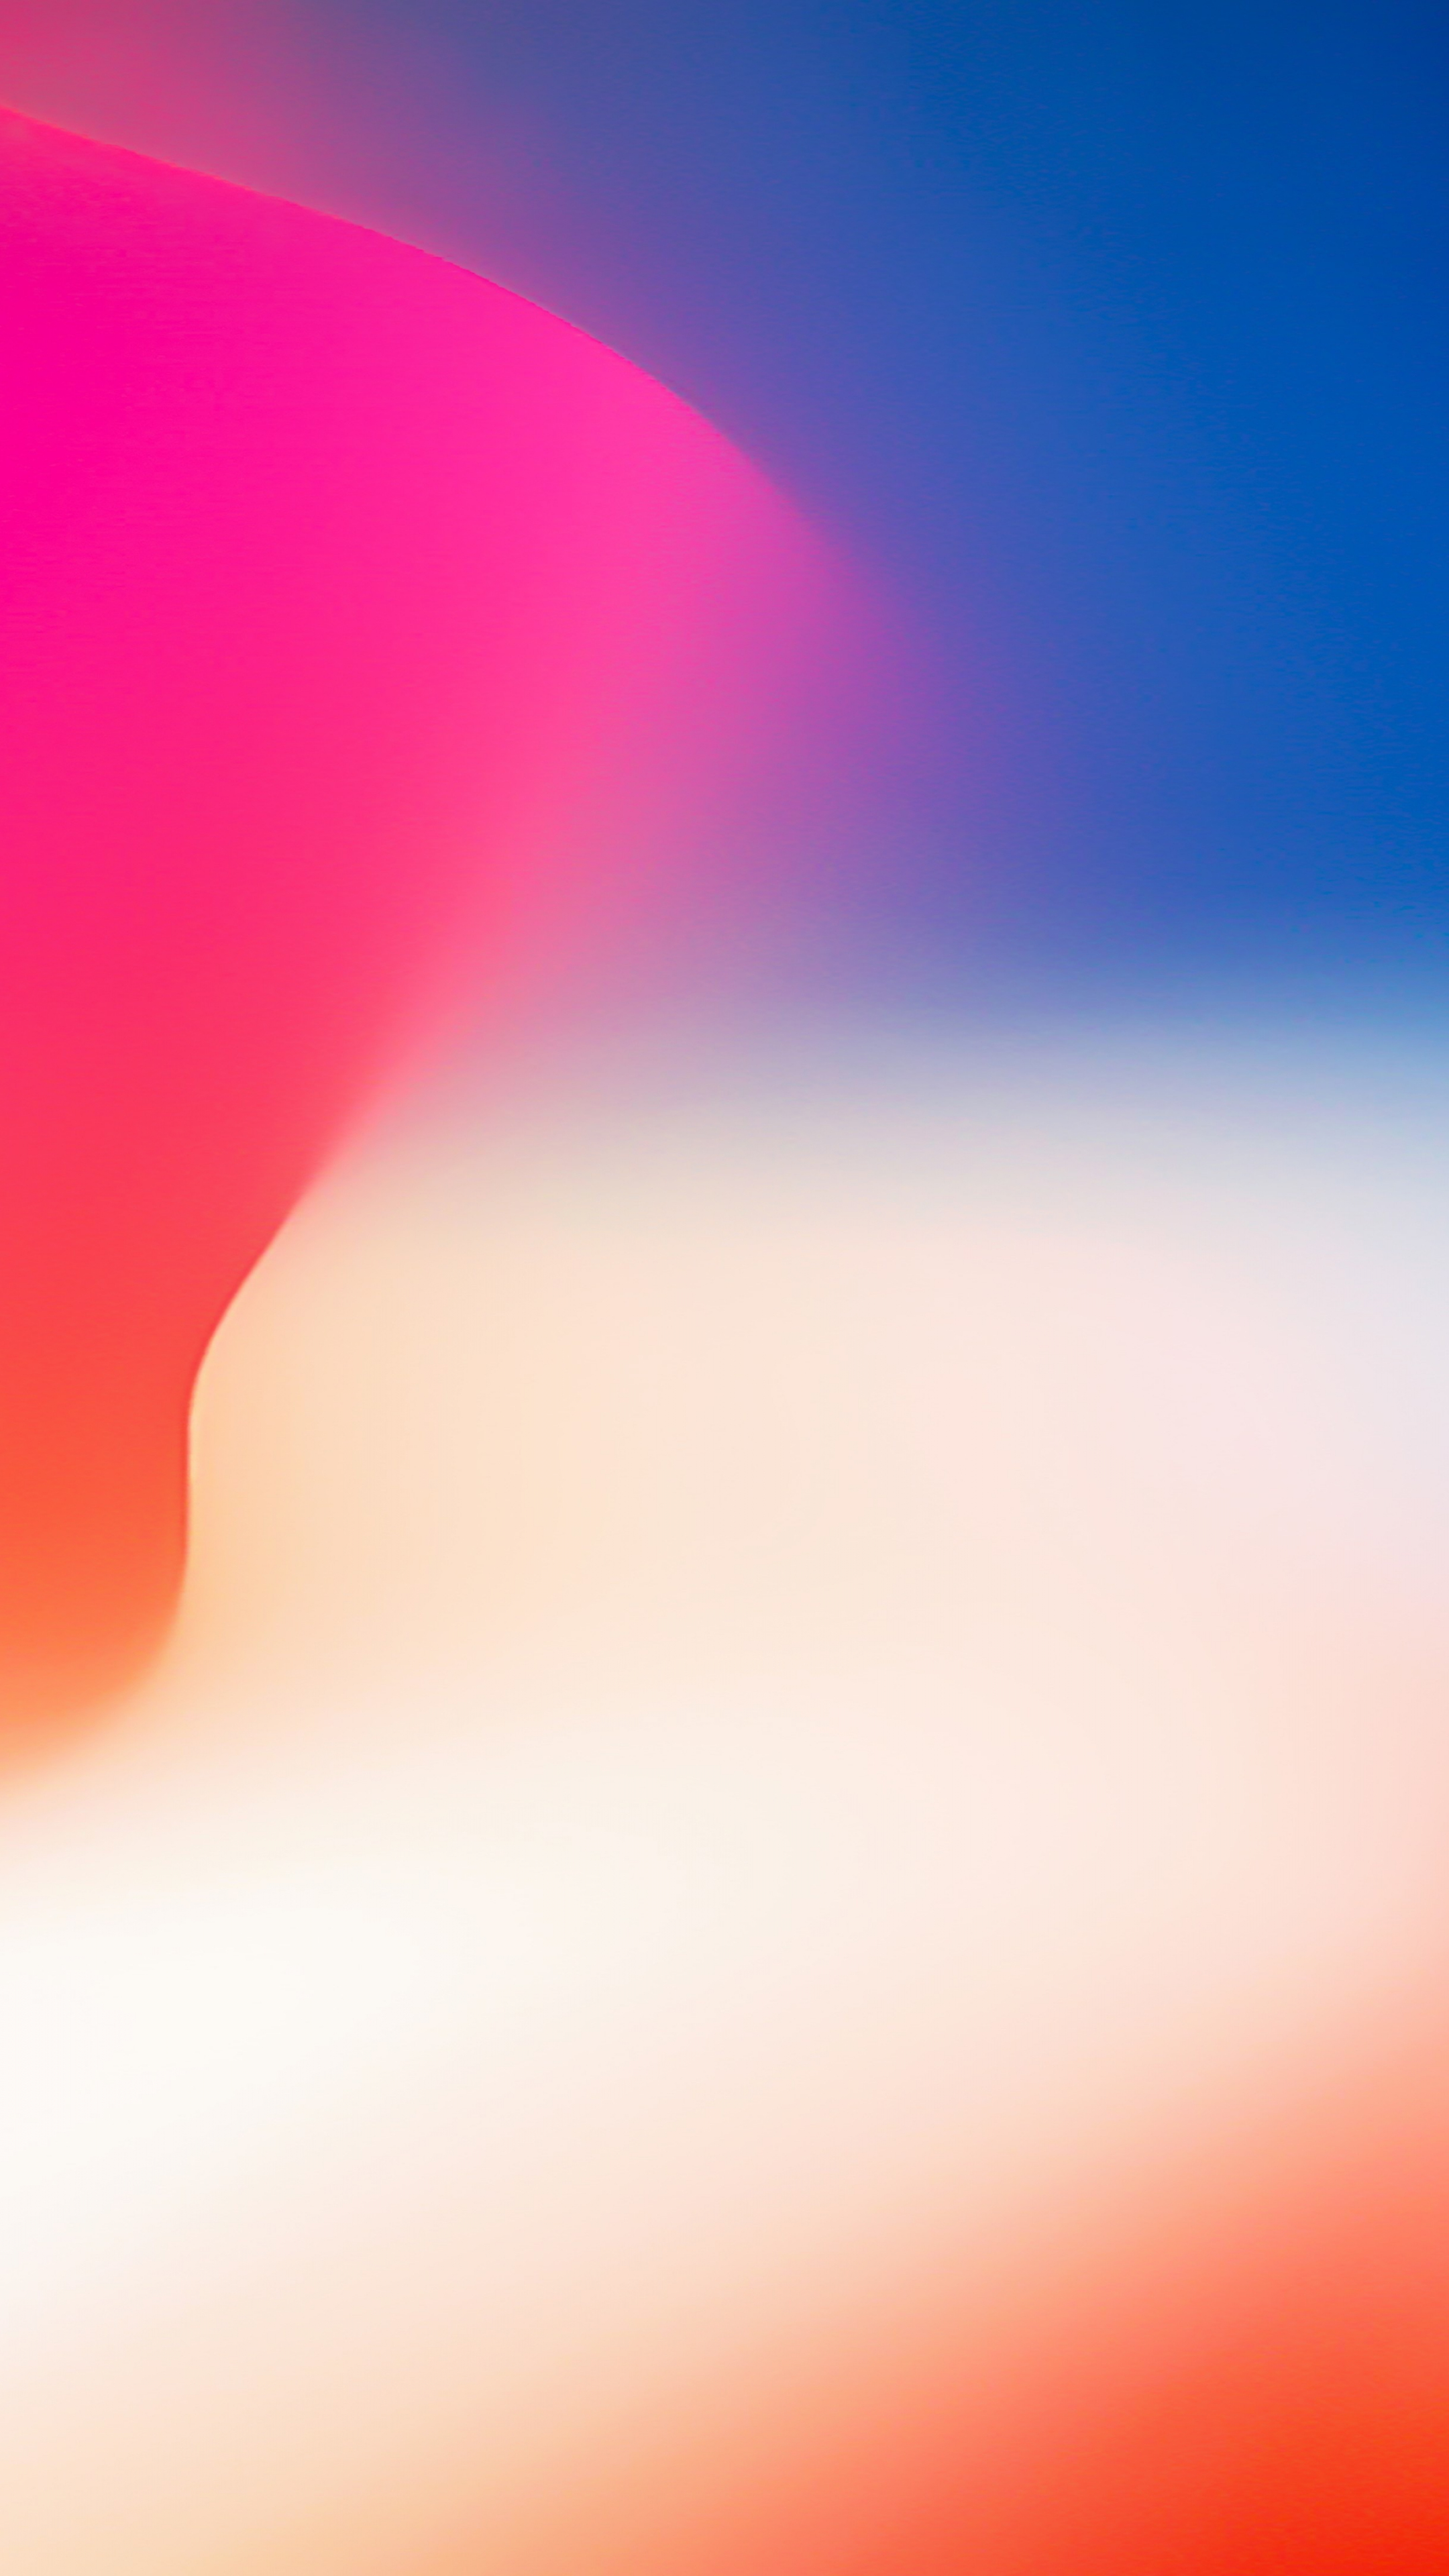 Download 2160x3840 Wallpaper Iphone X Stock Colorful Gradient Abstract 4k Sony Xperia Z5 Premium Dual 2160x3840 Hd Image Background 1317